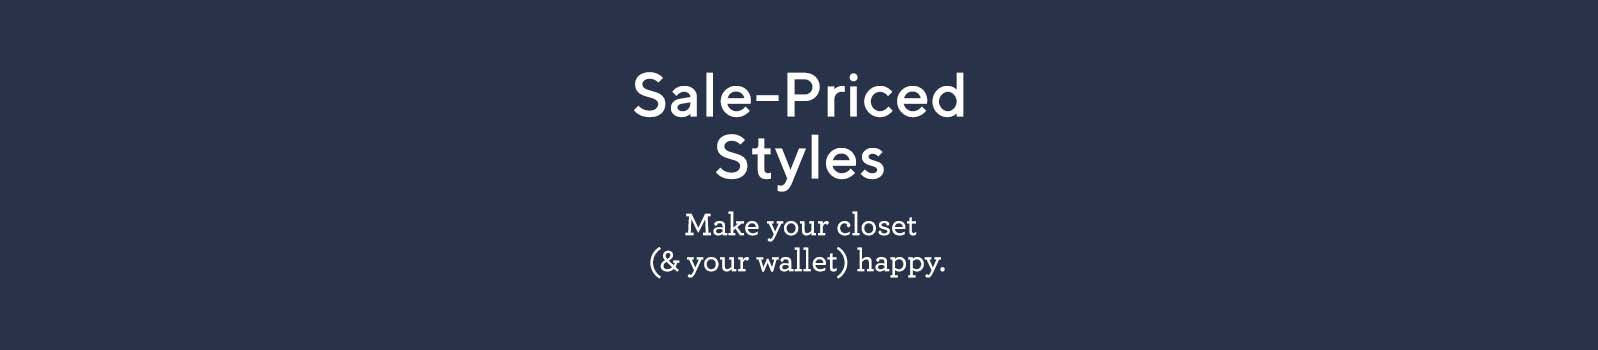 Sale-Priced Styles.  Make your closet (& your wallet) happy. 